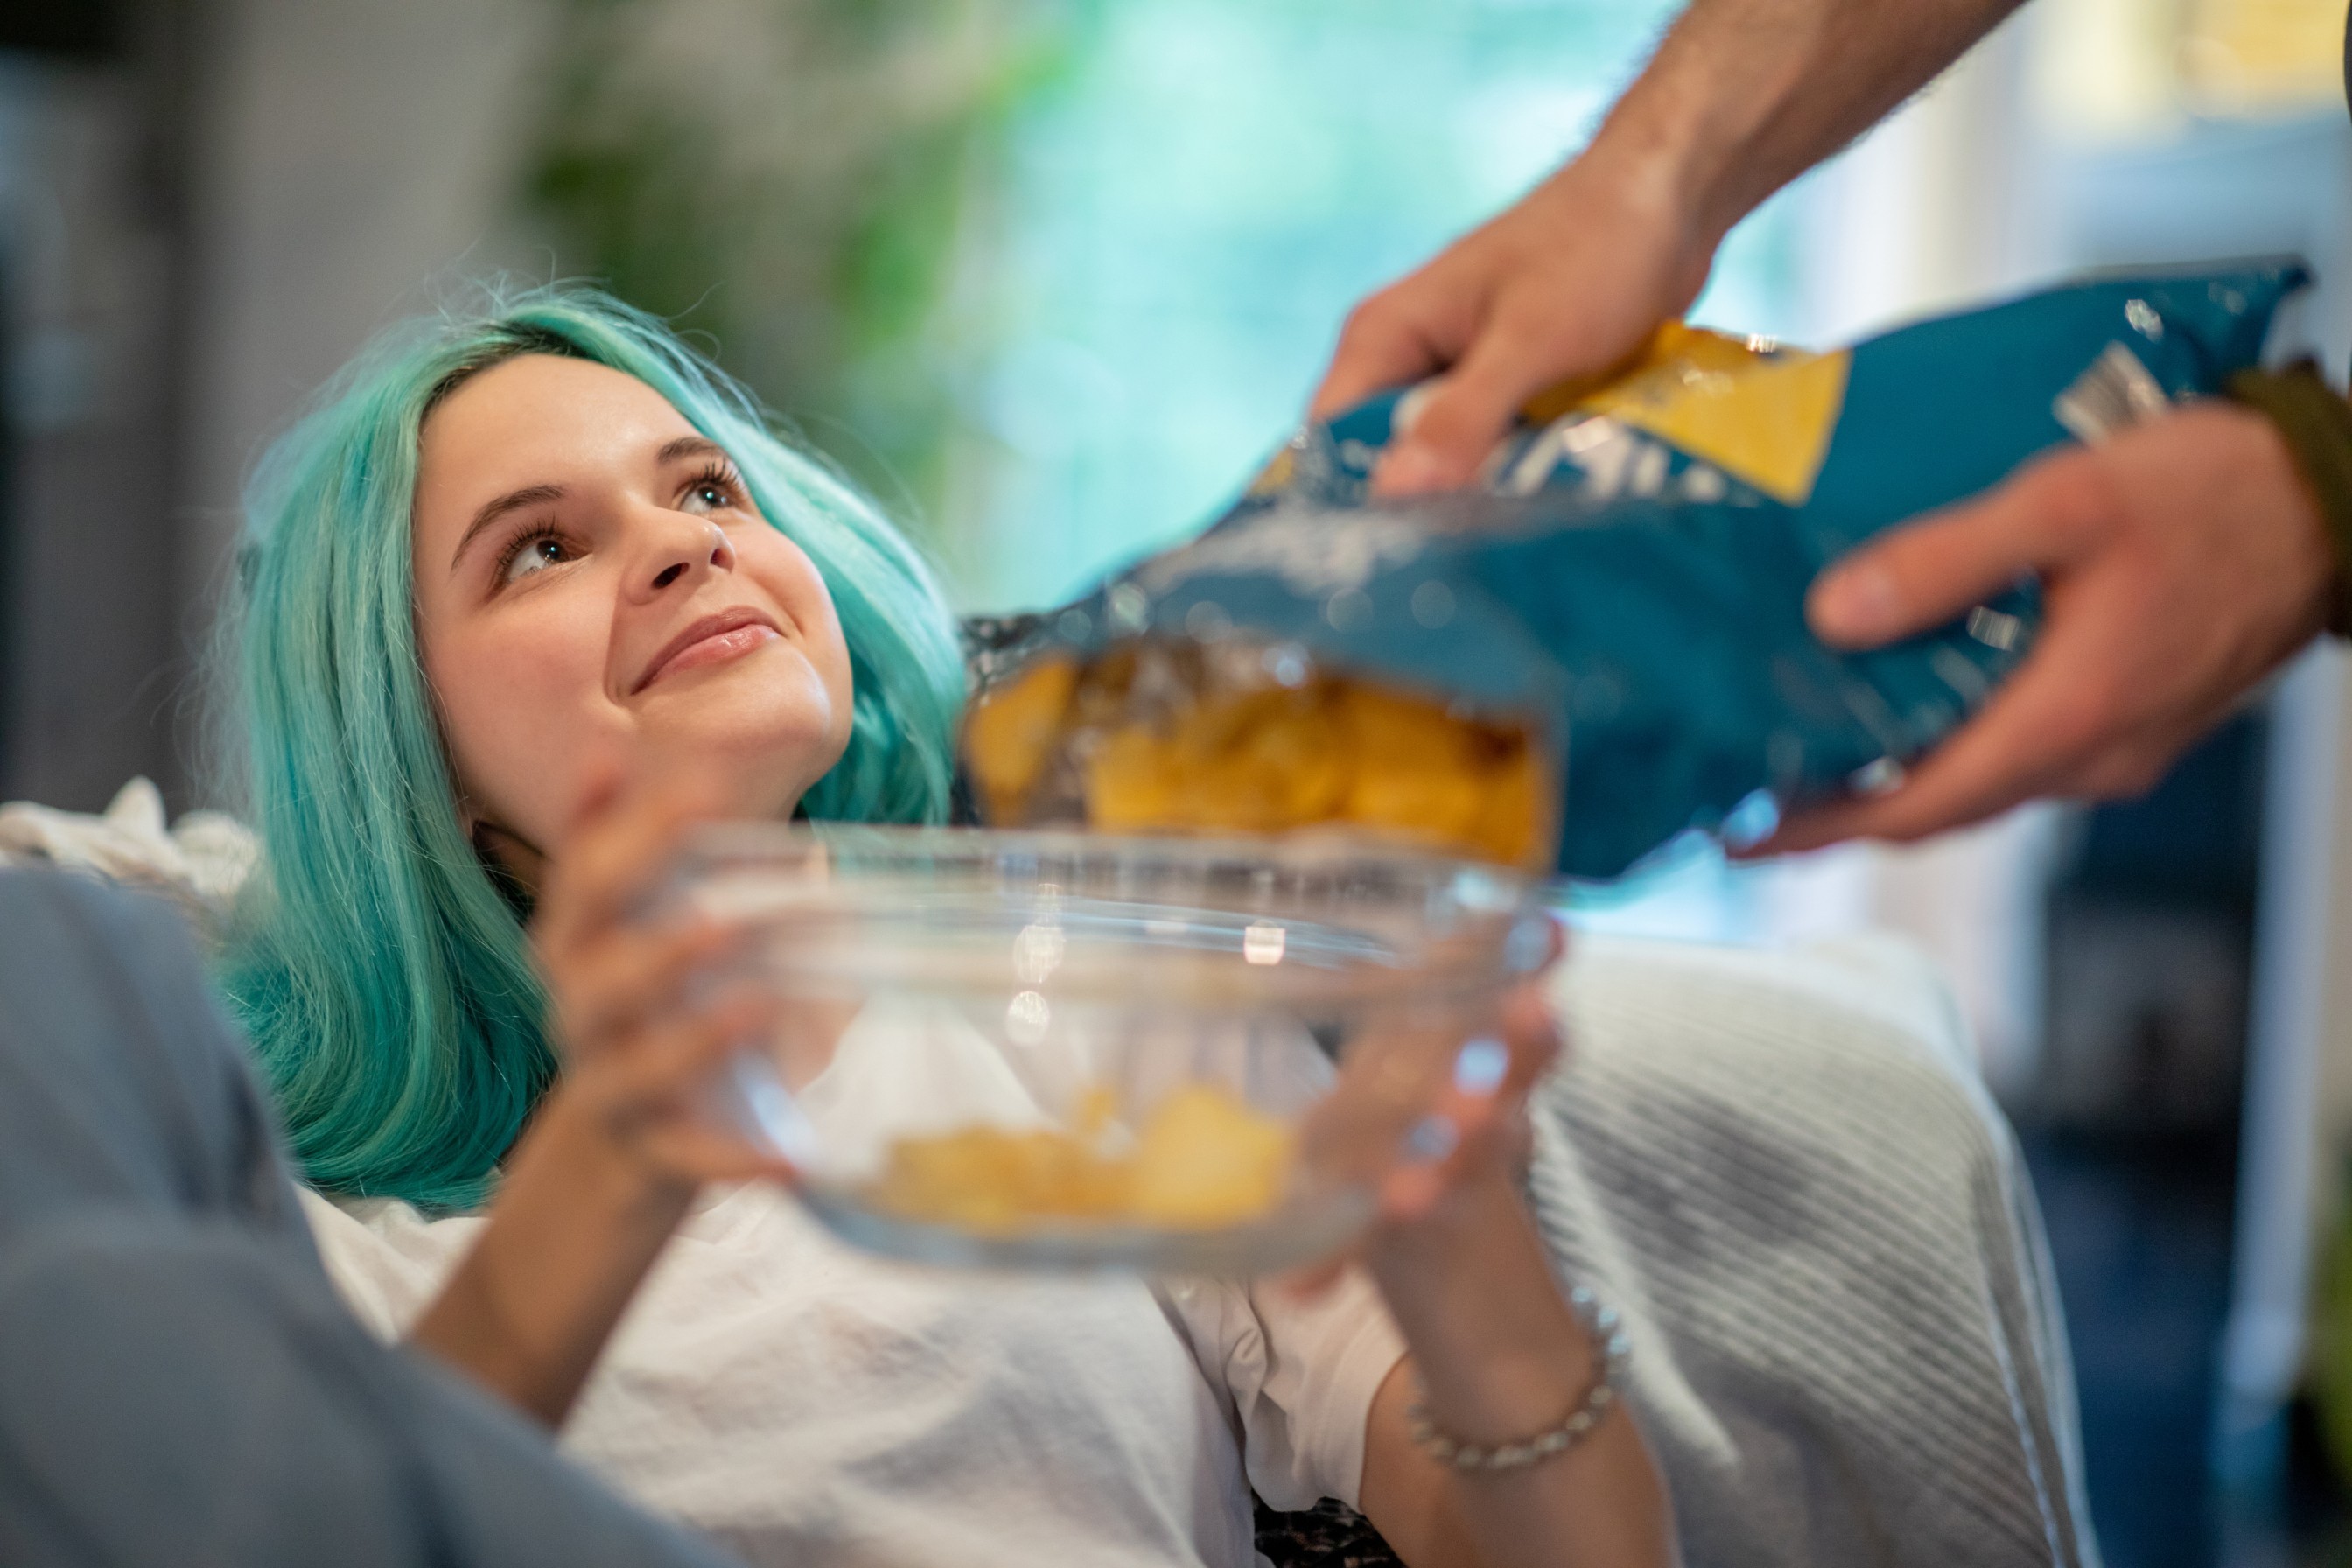 Girl with blue hair receiving a bowl of chips